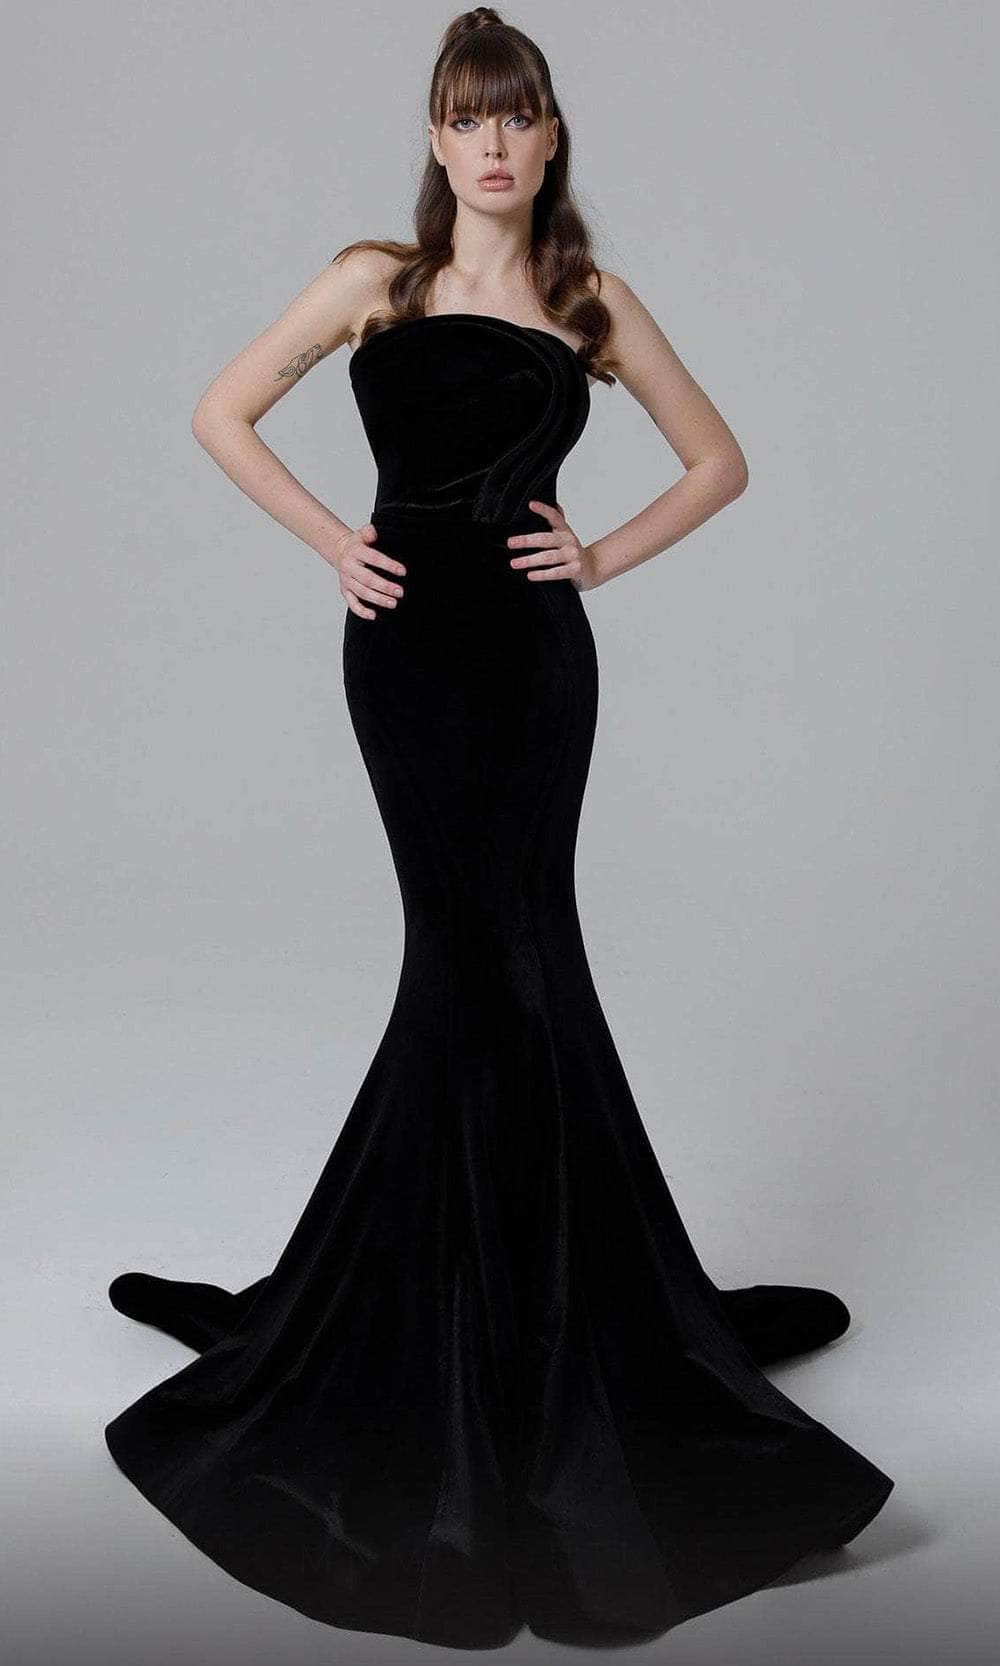 MNM Couture N0465 - Strapless Mermaid Evening Dress
